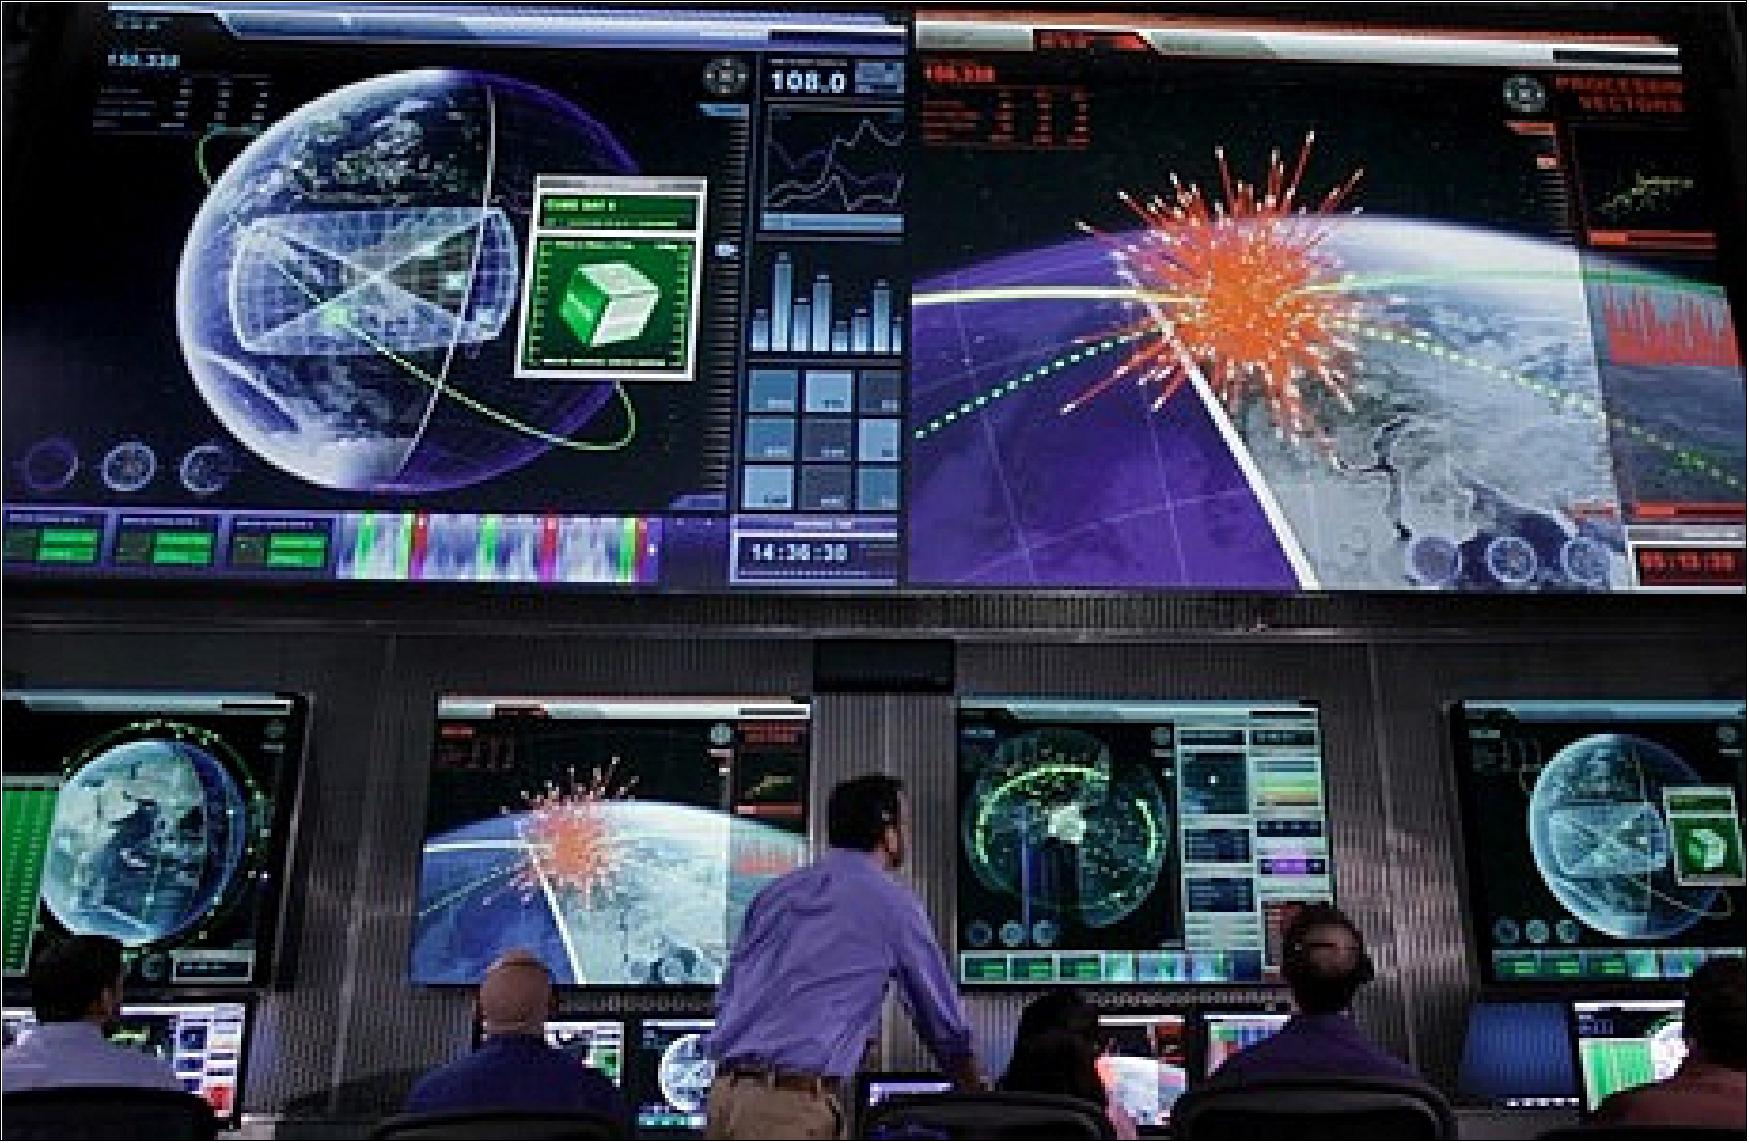 Figure 4: A view inside Lockheed Martin's prototype Space Fence control center (image credit: Lockheed Martin) 10)